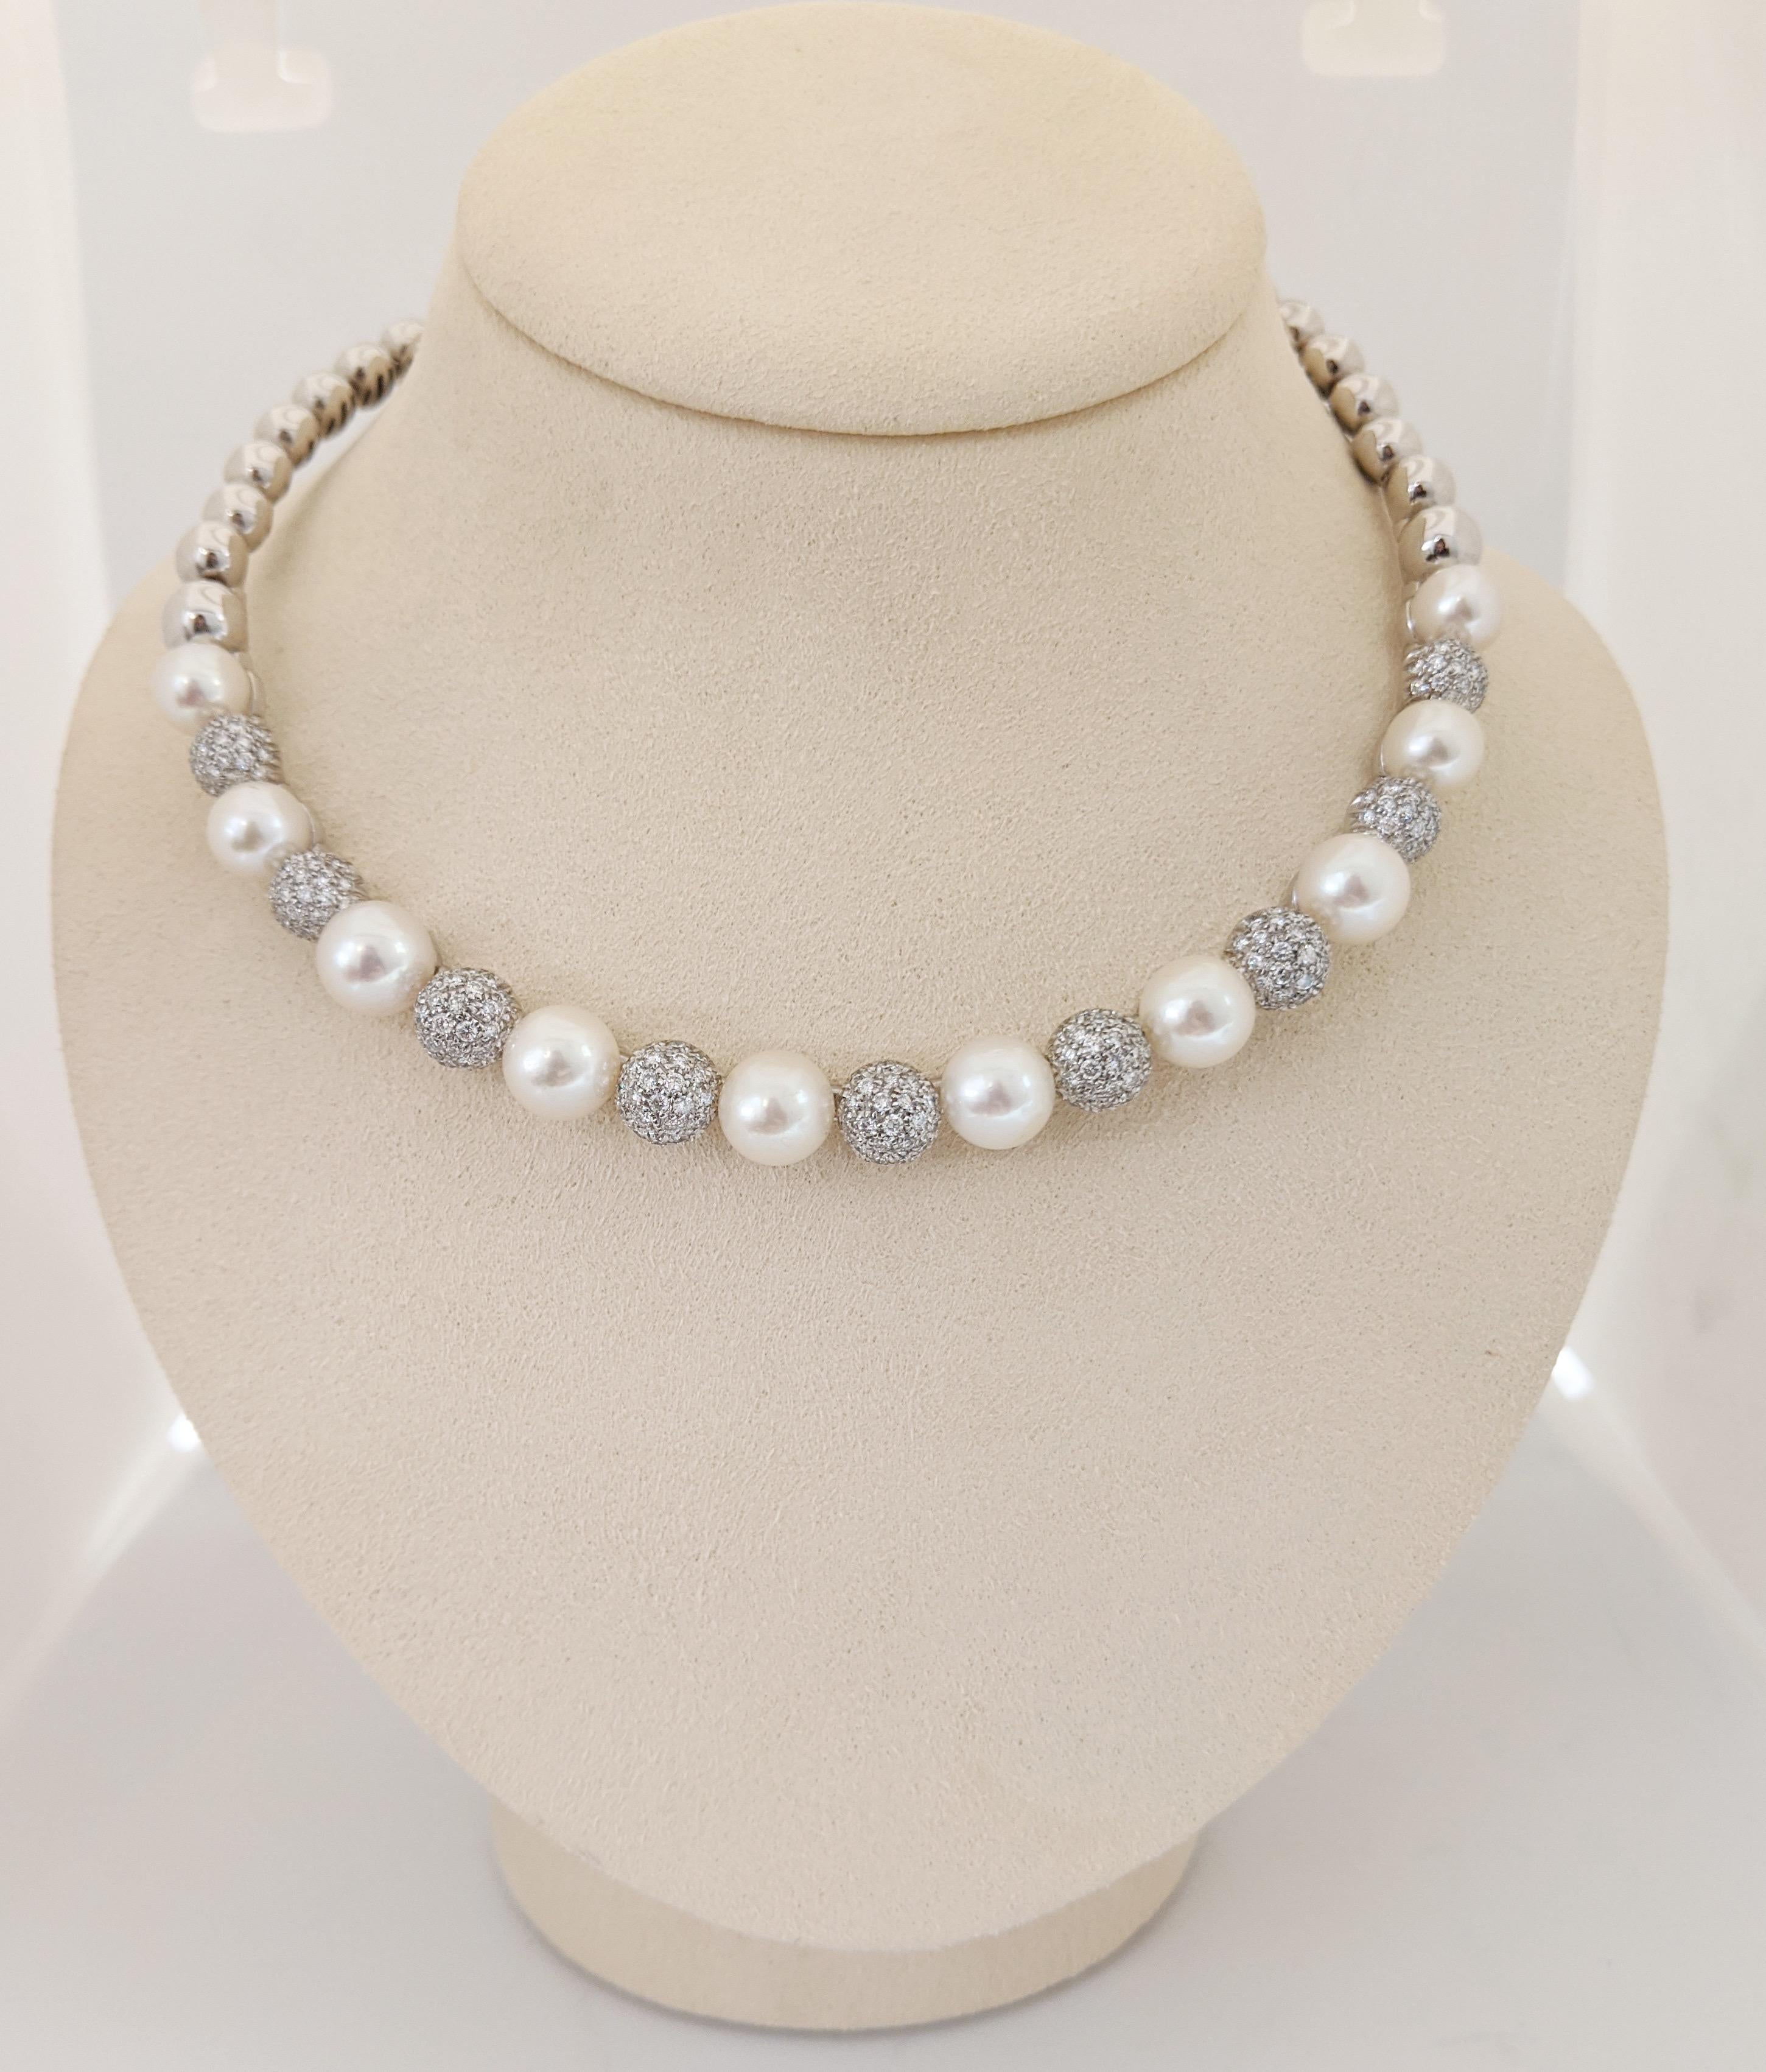 Feel like a princess in this beautiful 18 karat white gold , diamond and pearl choker. The necklace has been set with 9 pave diamond balls which alternate with 10 cultured white pearls. The pattern continues to the back with 18 karat white gold high